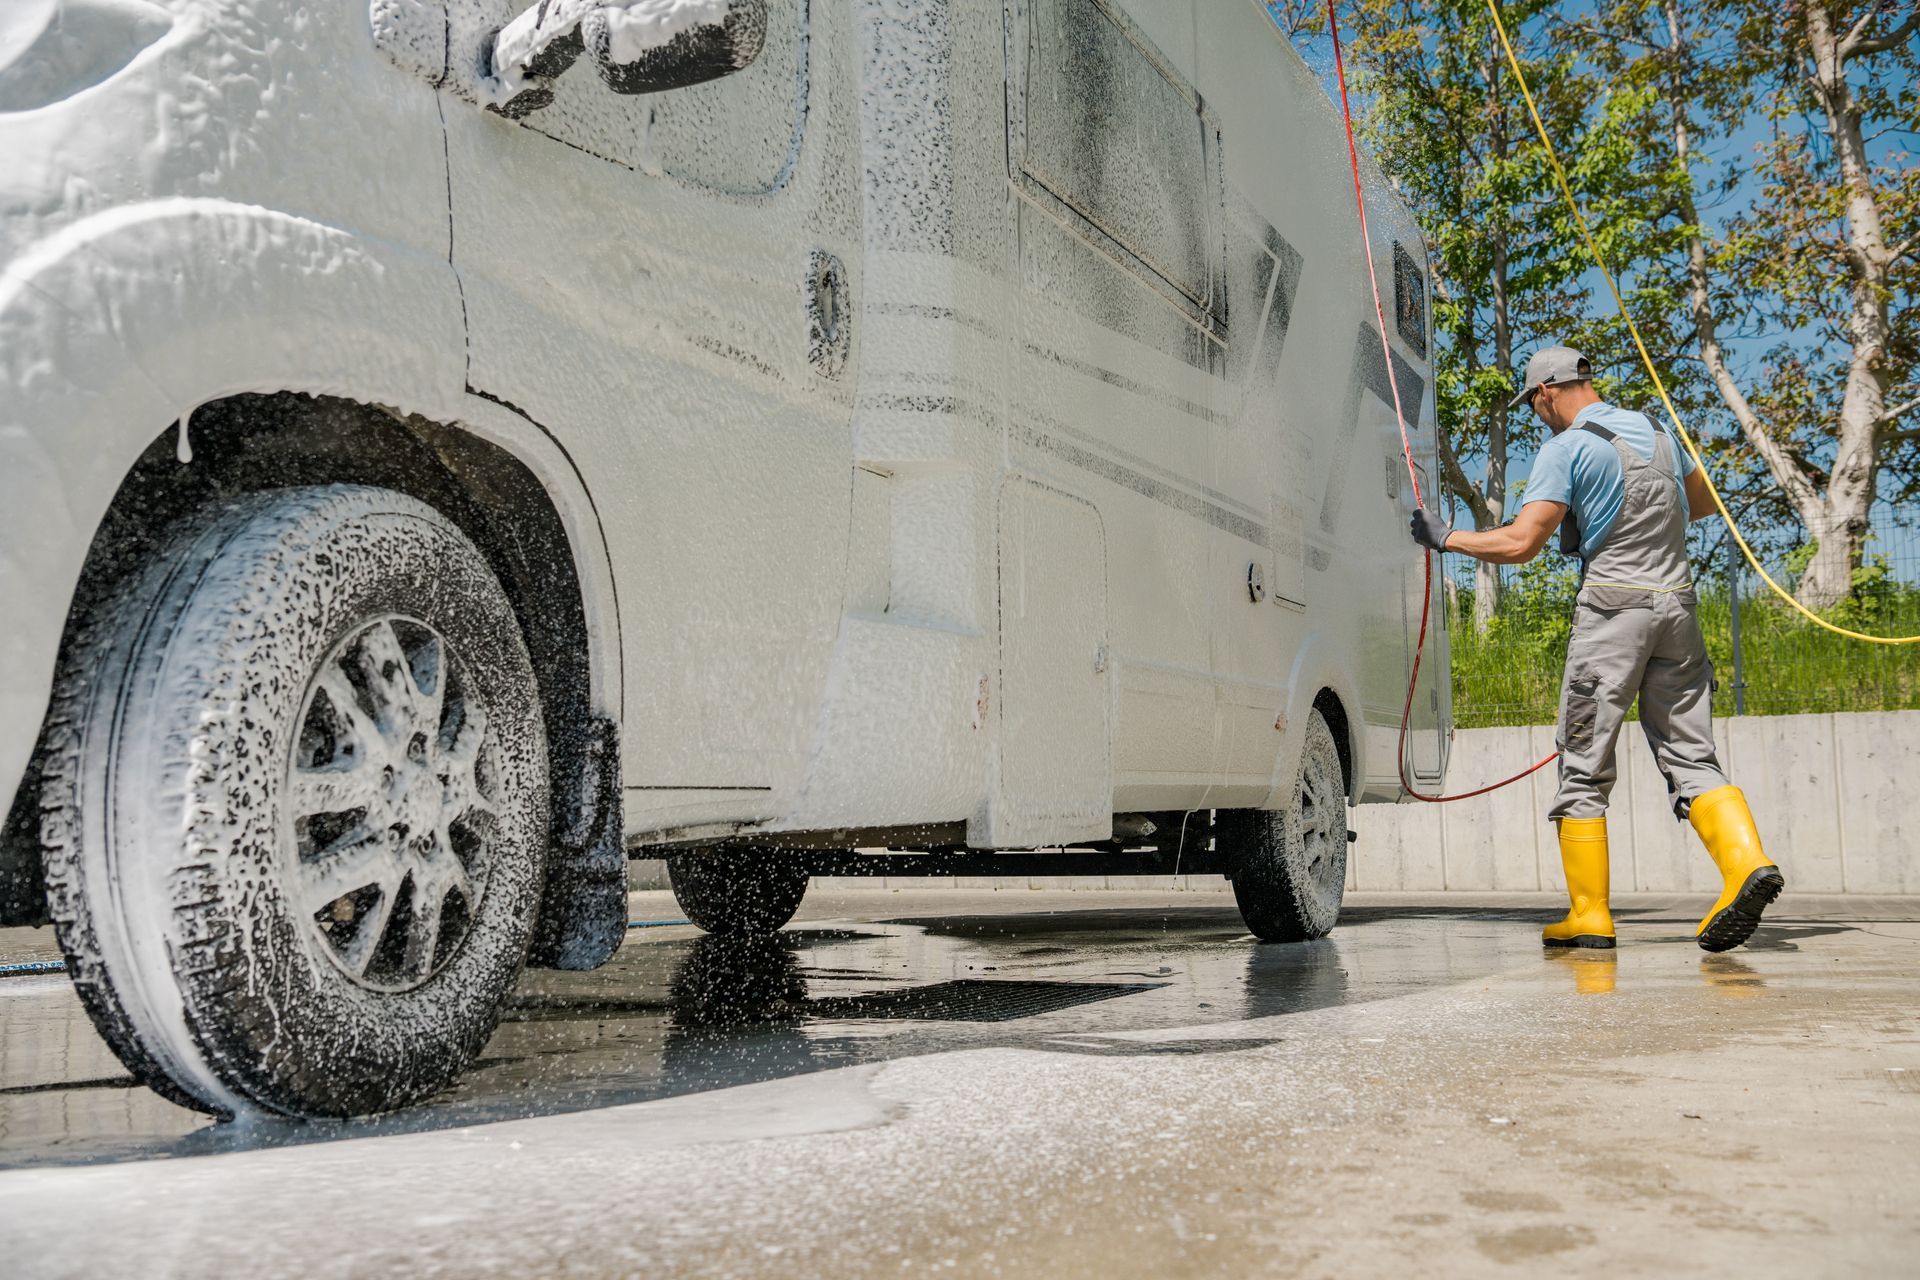 A man is washing a white van with foam.